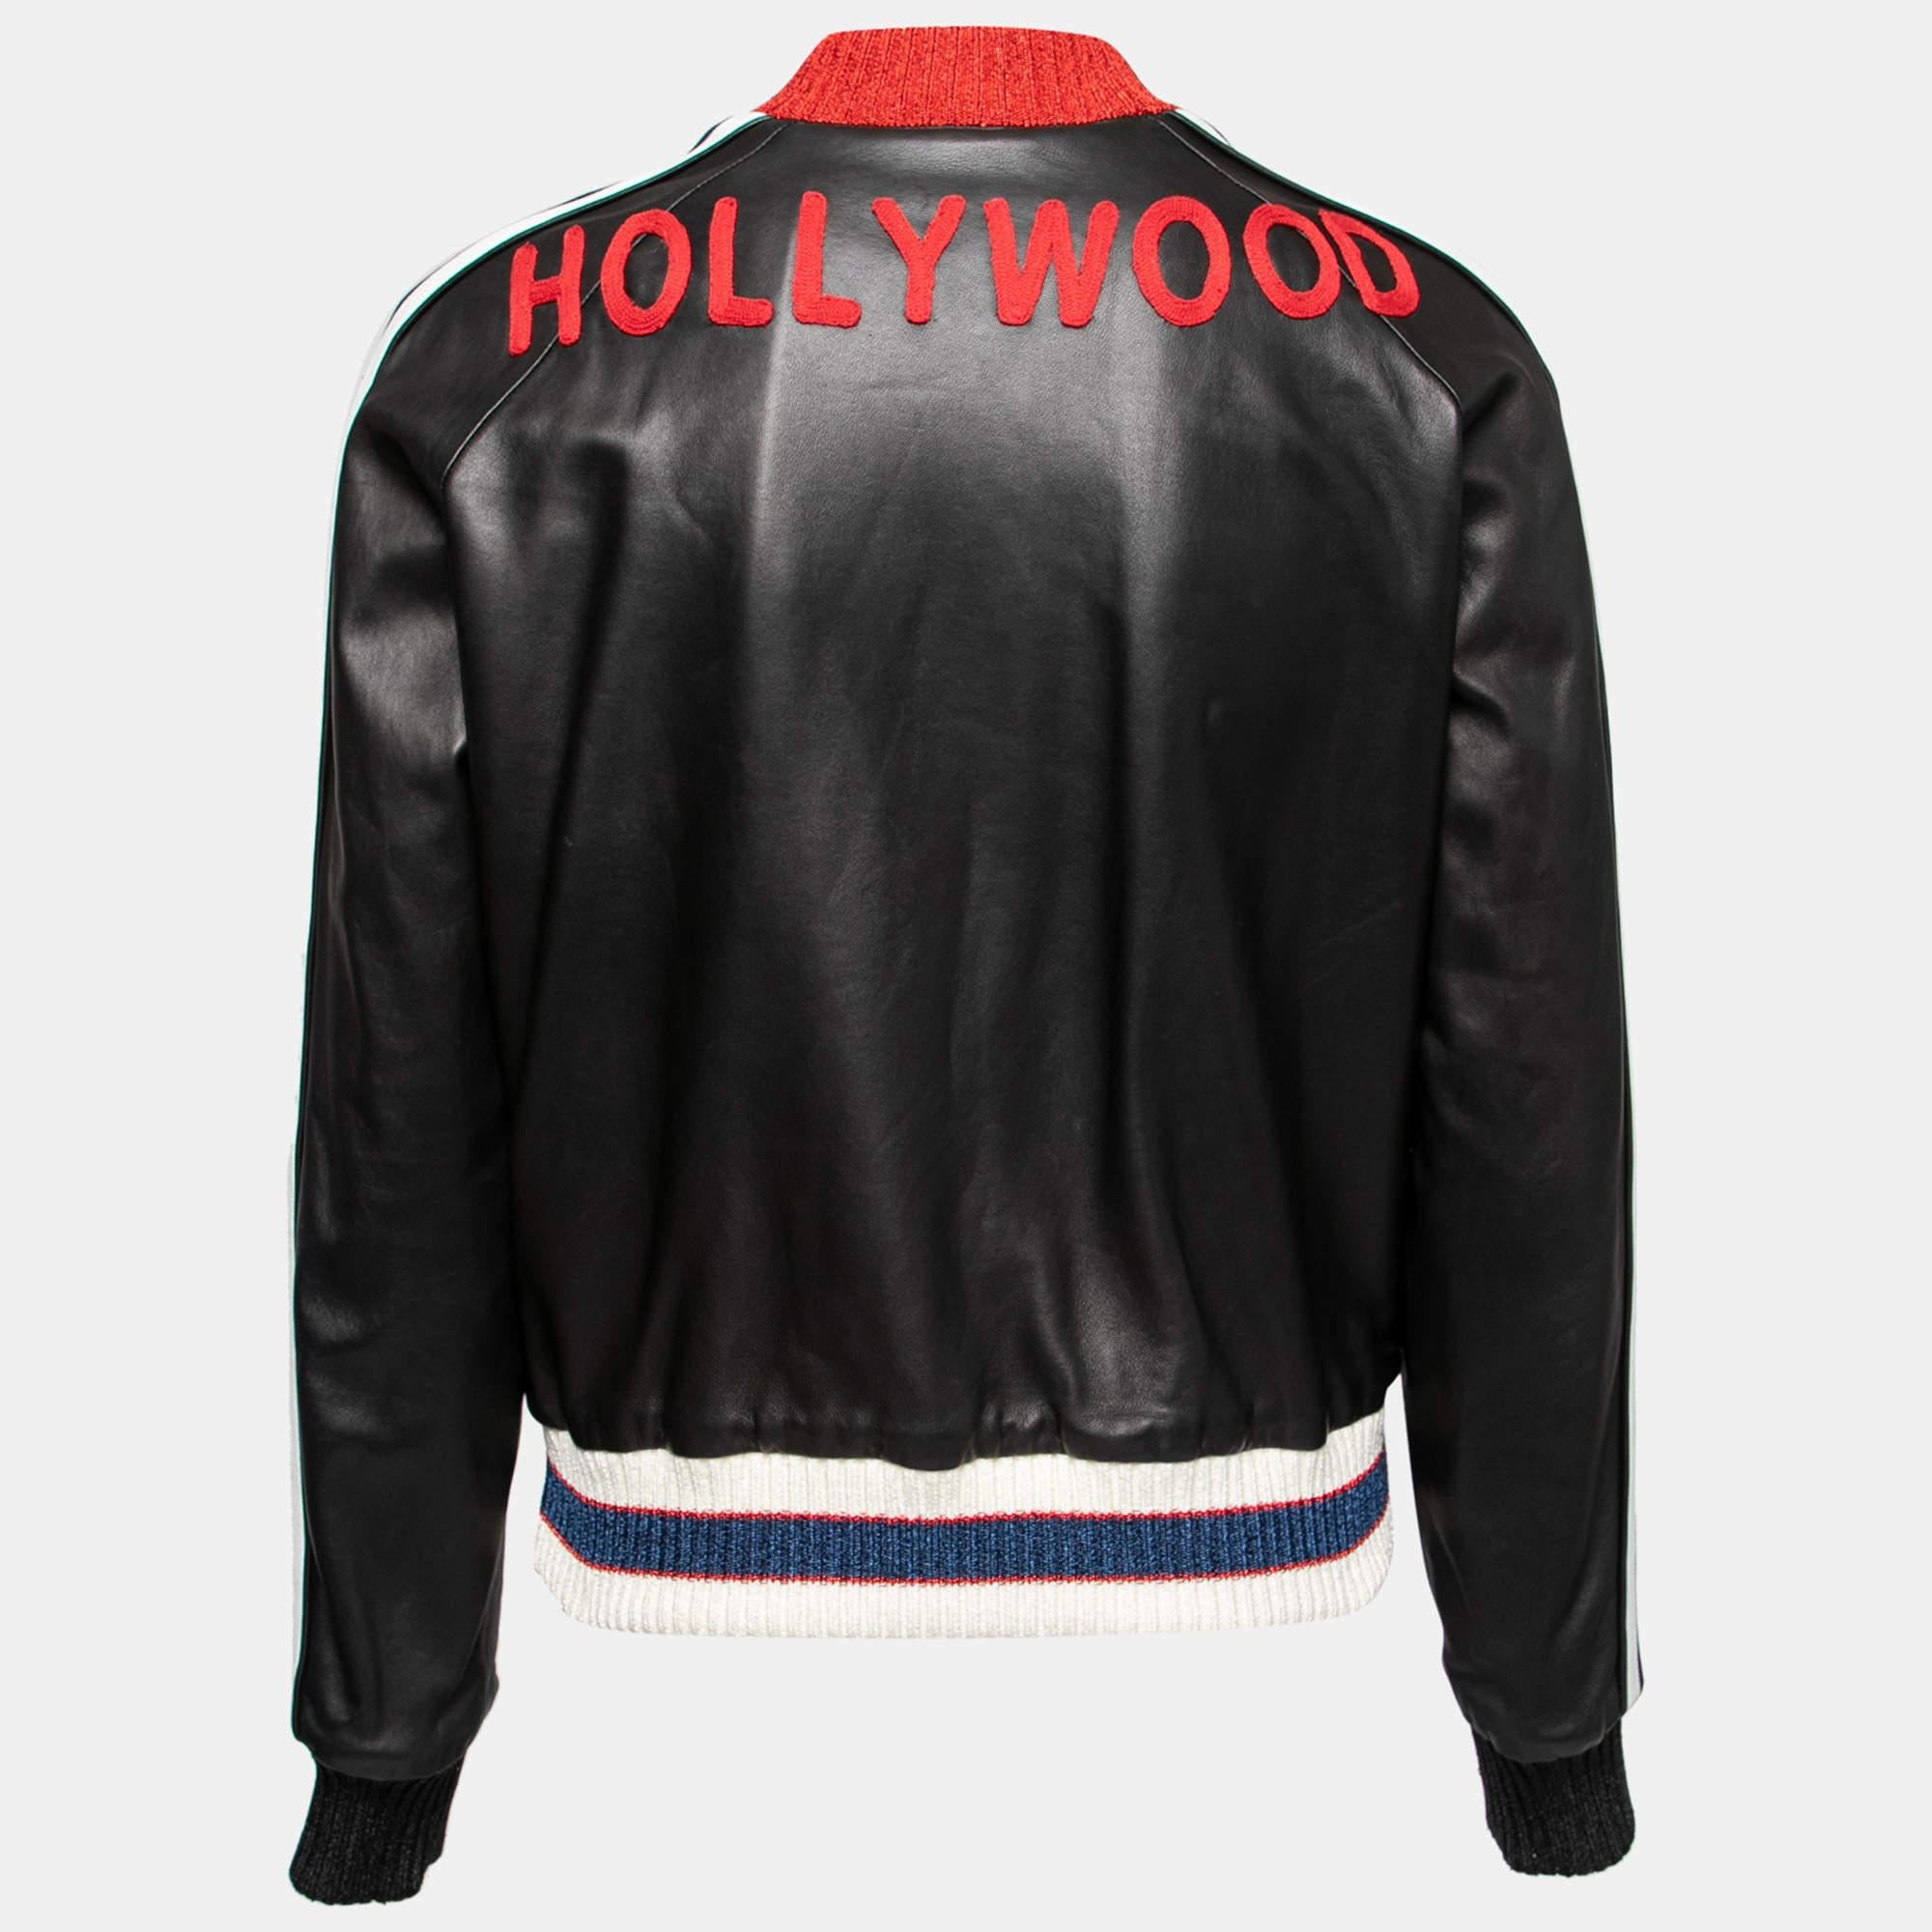 This Bomber jacket from the House of Gucci will help you sport a dapper style. It is designed using black leather, with Hollywood embroidery highlighting the back. It is embellished with gold-tone buttons and contrasting trims. This jacket